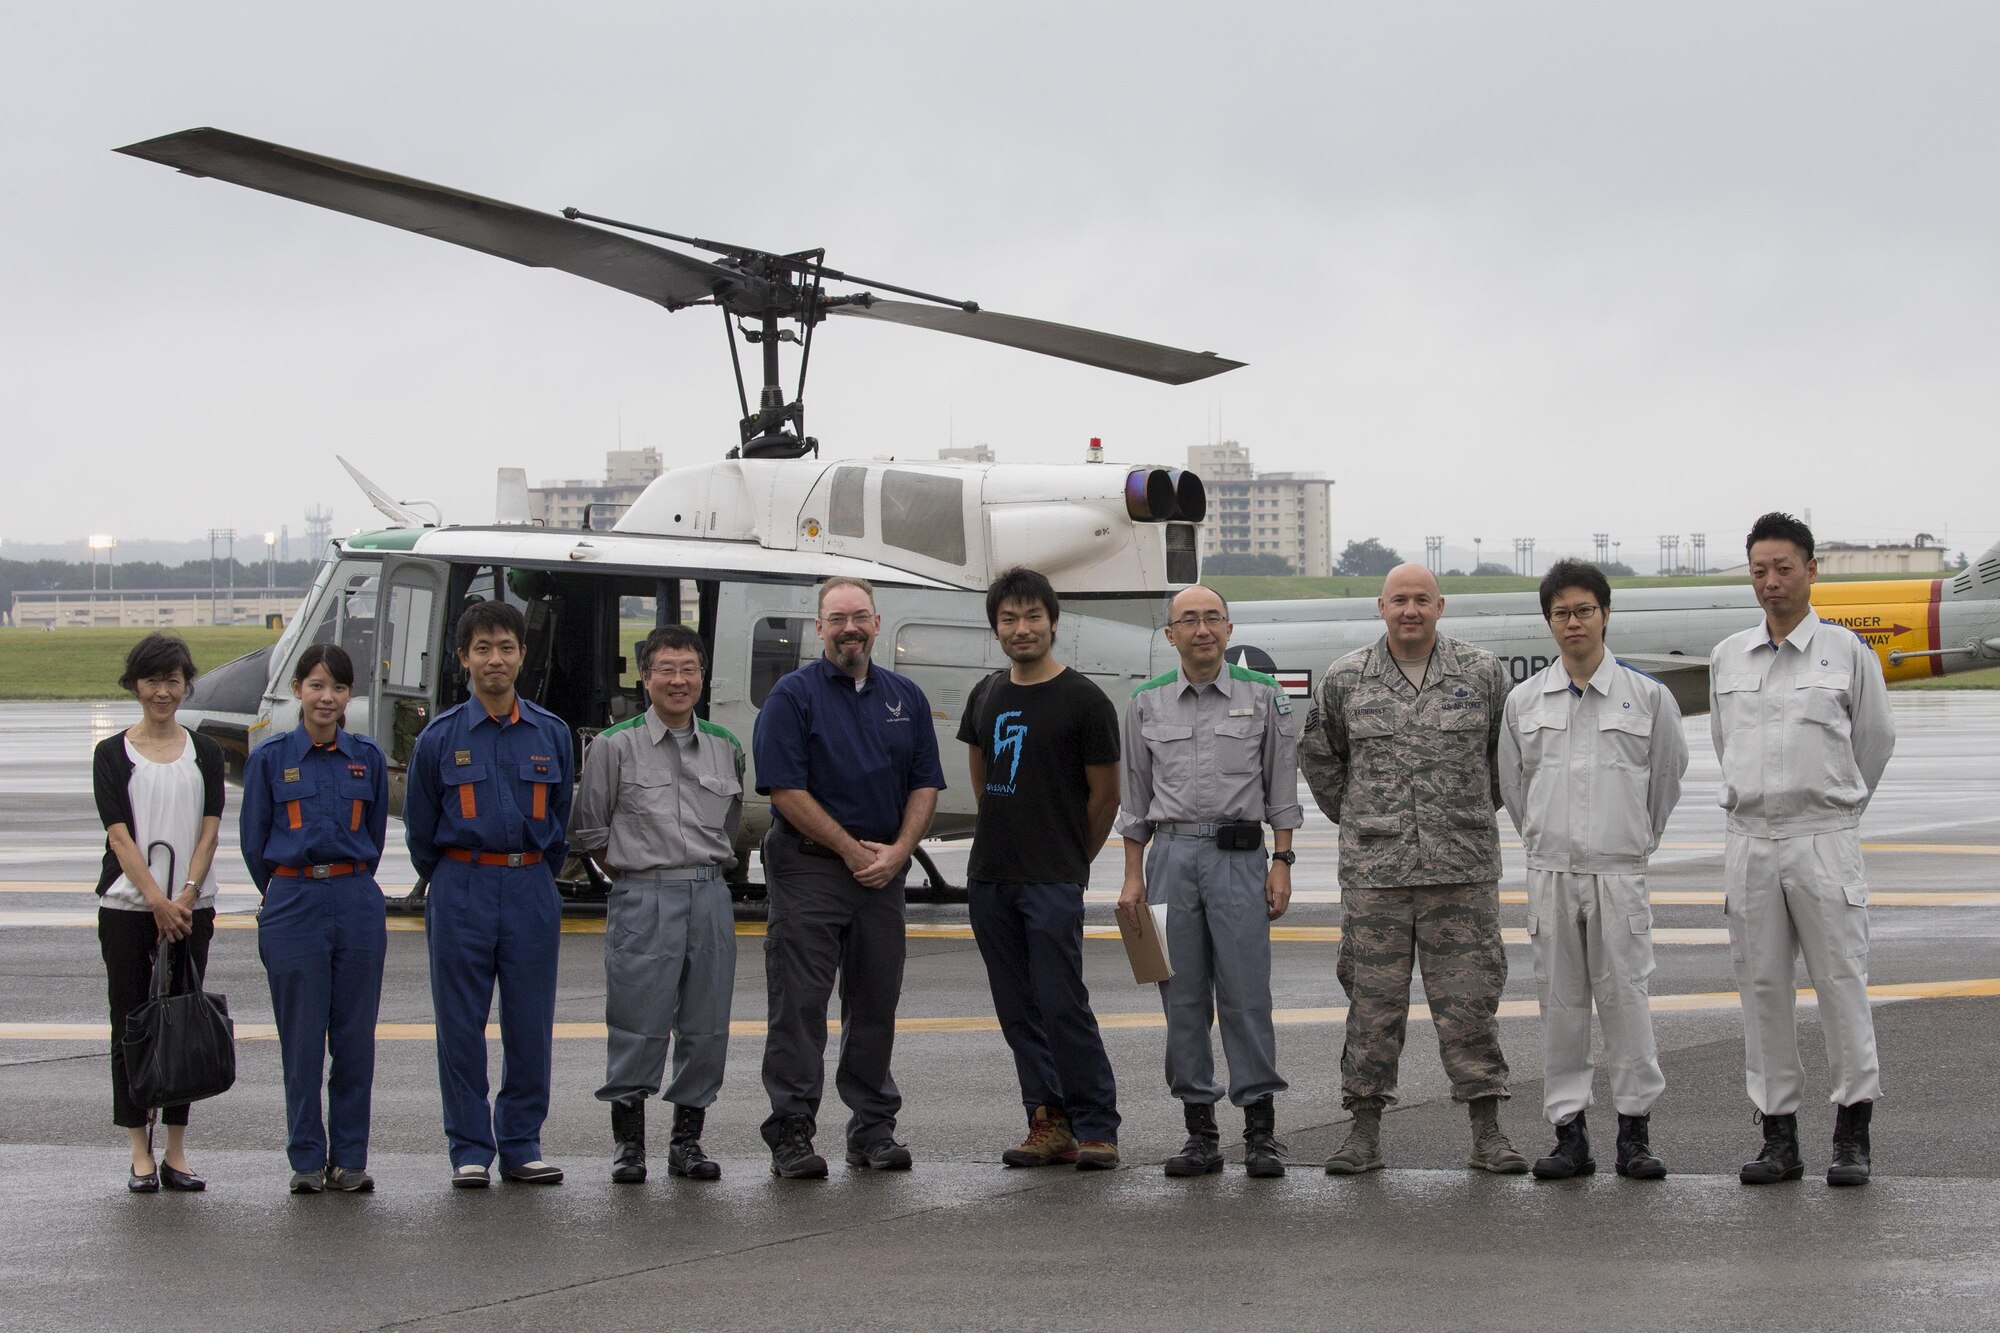 Members with the Tokyo Metropolitan Government, Fussa Red Cross, Musashimurayama City hall, and Airmen with the 374th Airlift Wing pose for a photo at Yokota Air Base, Japan, Sept. 4, 2016, during the Annual Tokyo Metropolitan Government Disaster Management Drill. Airmen with the 459 AS delivered simulated disaster relief supplies to the Tokyo Rinkai Disaster Prevention Park during annual Tokyo Metropolitan Government Disaster Management Drill. The park is located in the Ariake area and is a disaster countermeasure headquarters of the Government of Japan and other local governments during large-scale earthquakes in the metropolitan area. U.S. Air Force photo by Yasuo Osakabe/Released)    